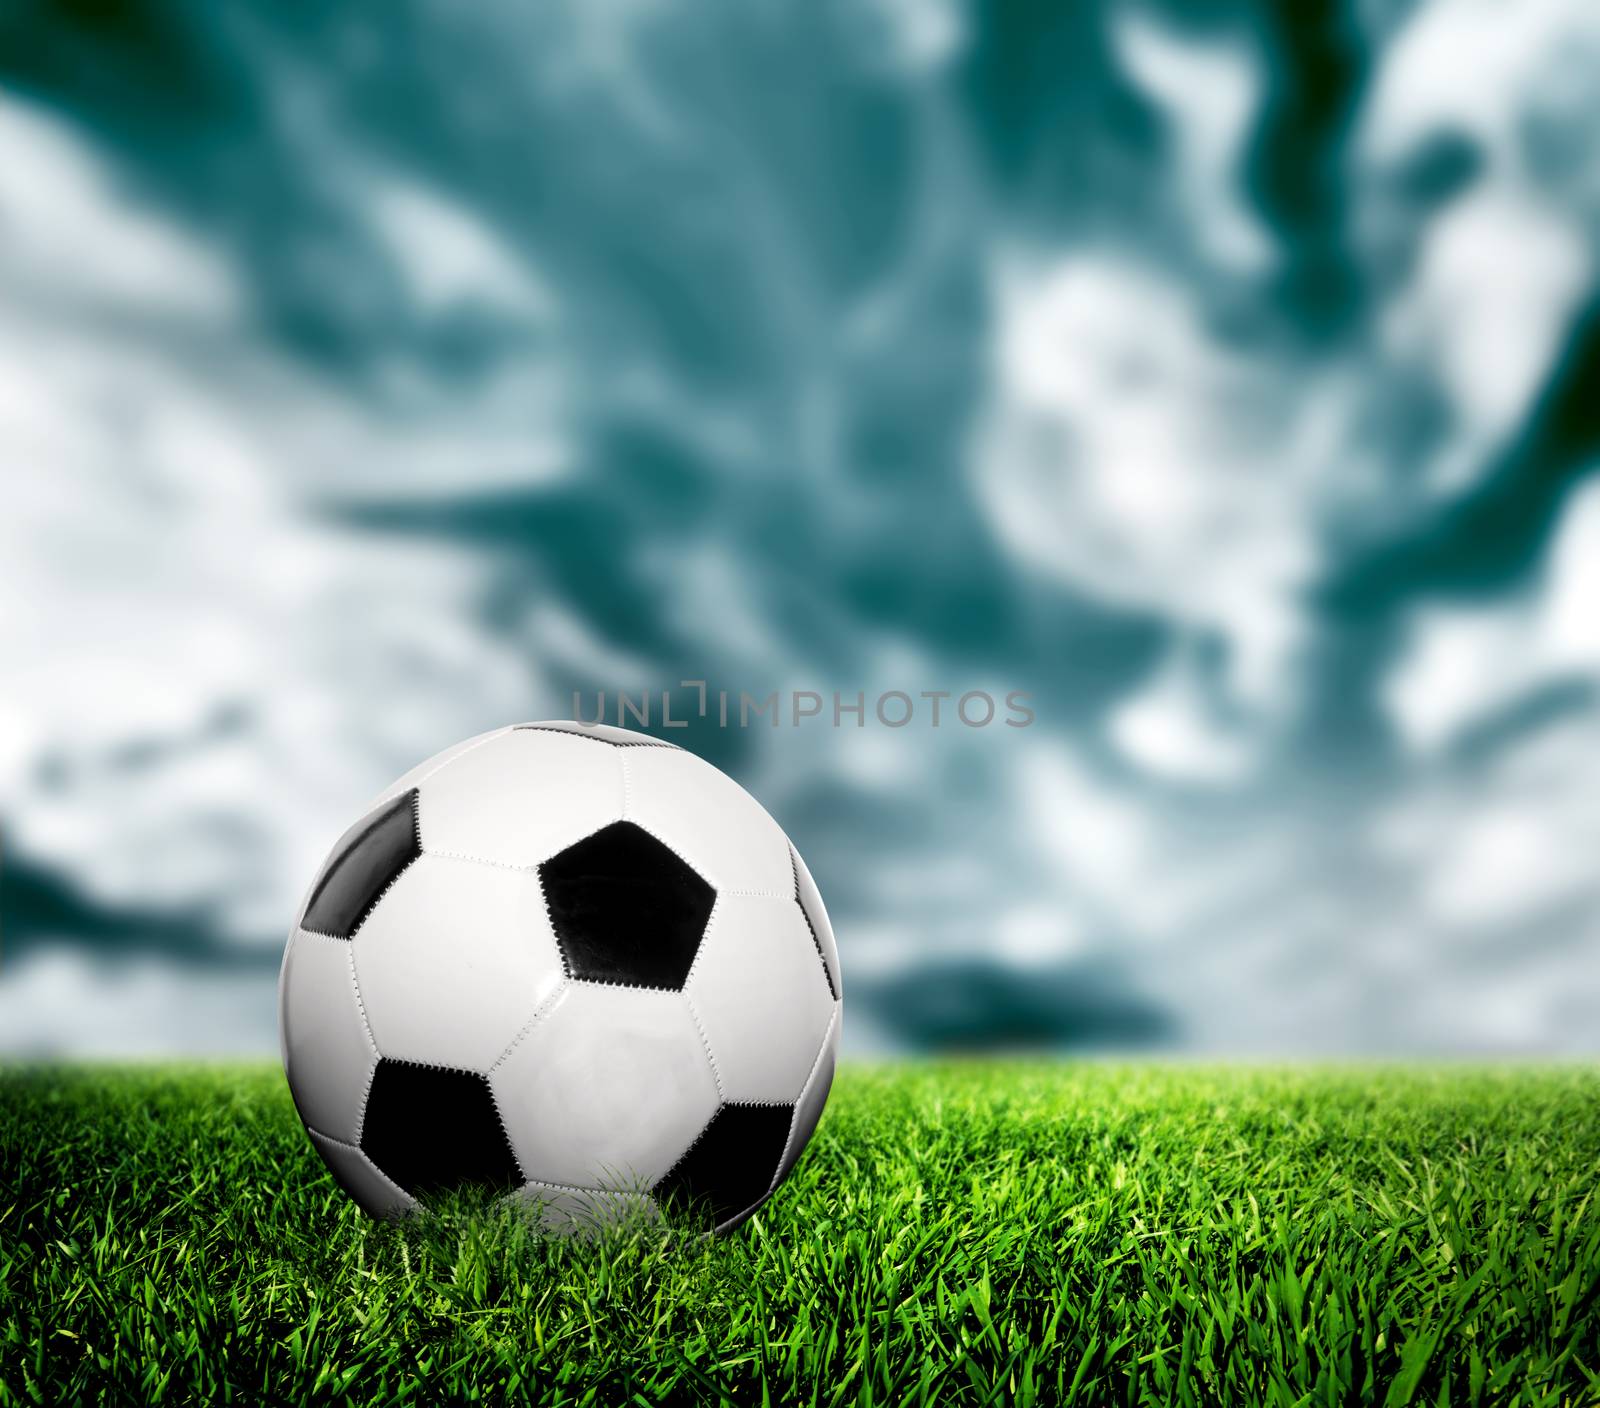 Football, soccer. A leather ball on grass, lawn. by photocreo